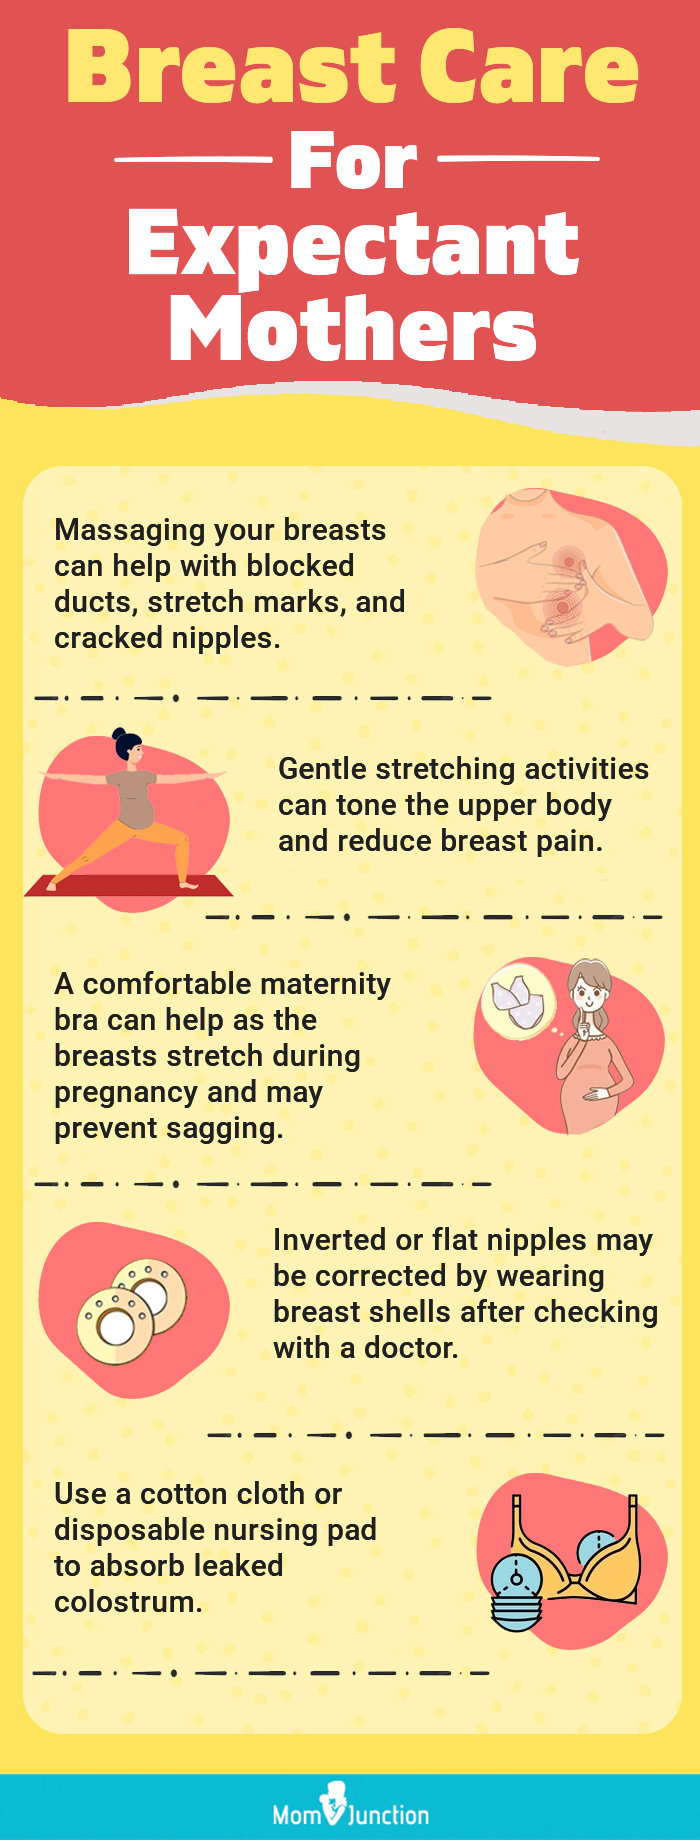 5 Effective Tips For Proper Breast Care During Pregnancy